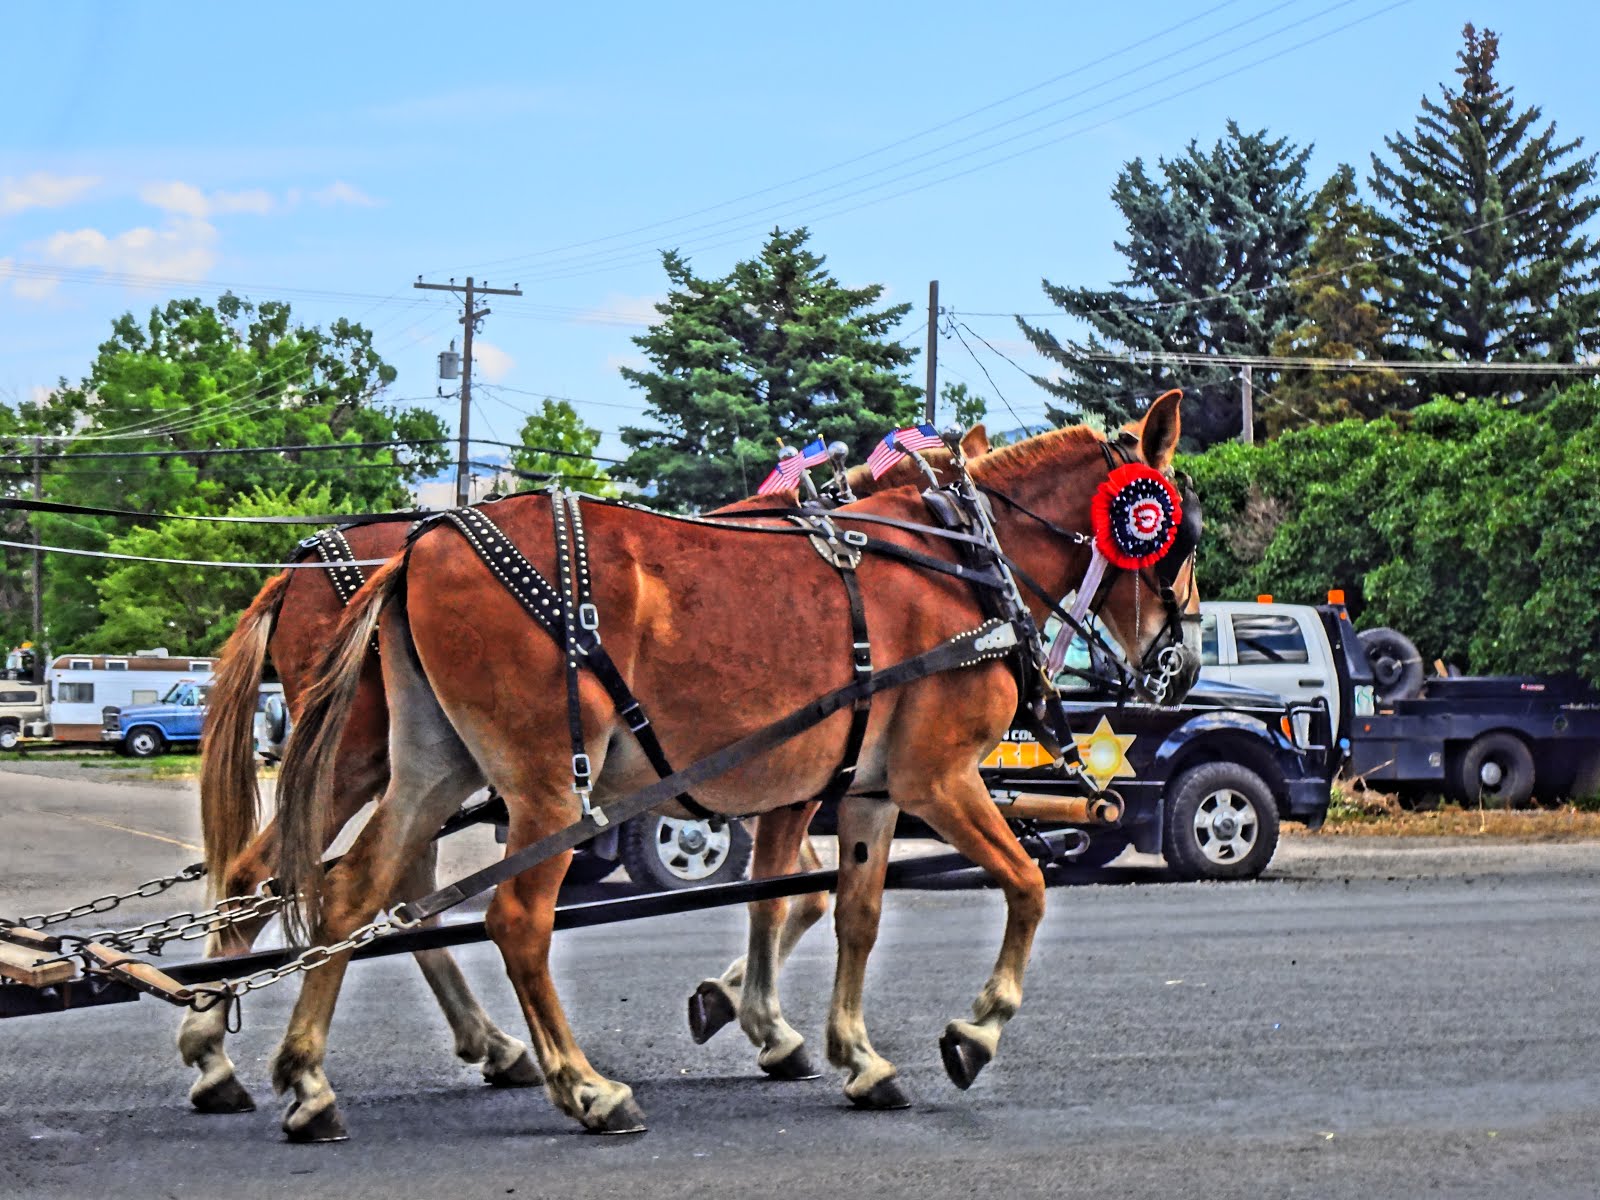 Mules in Montana Parade